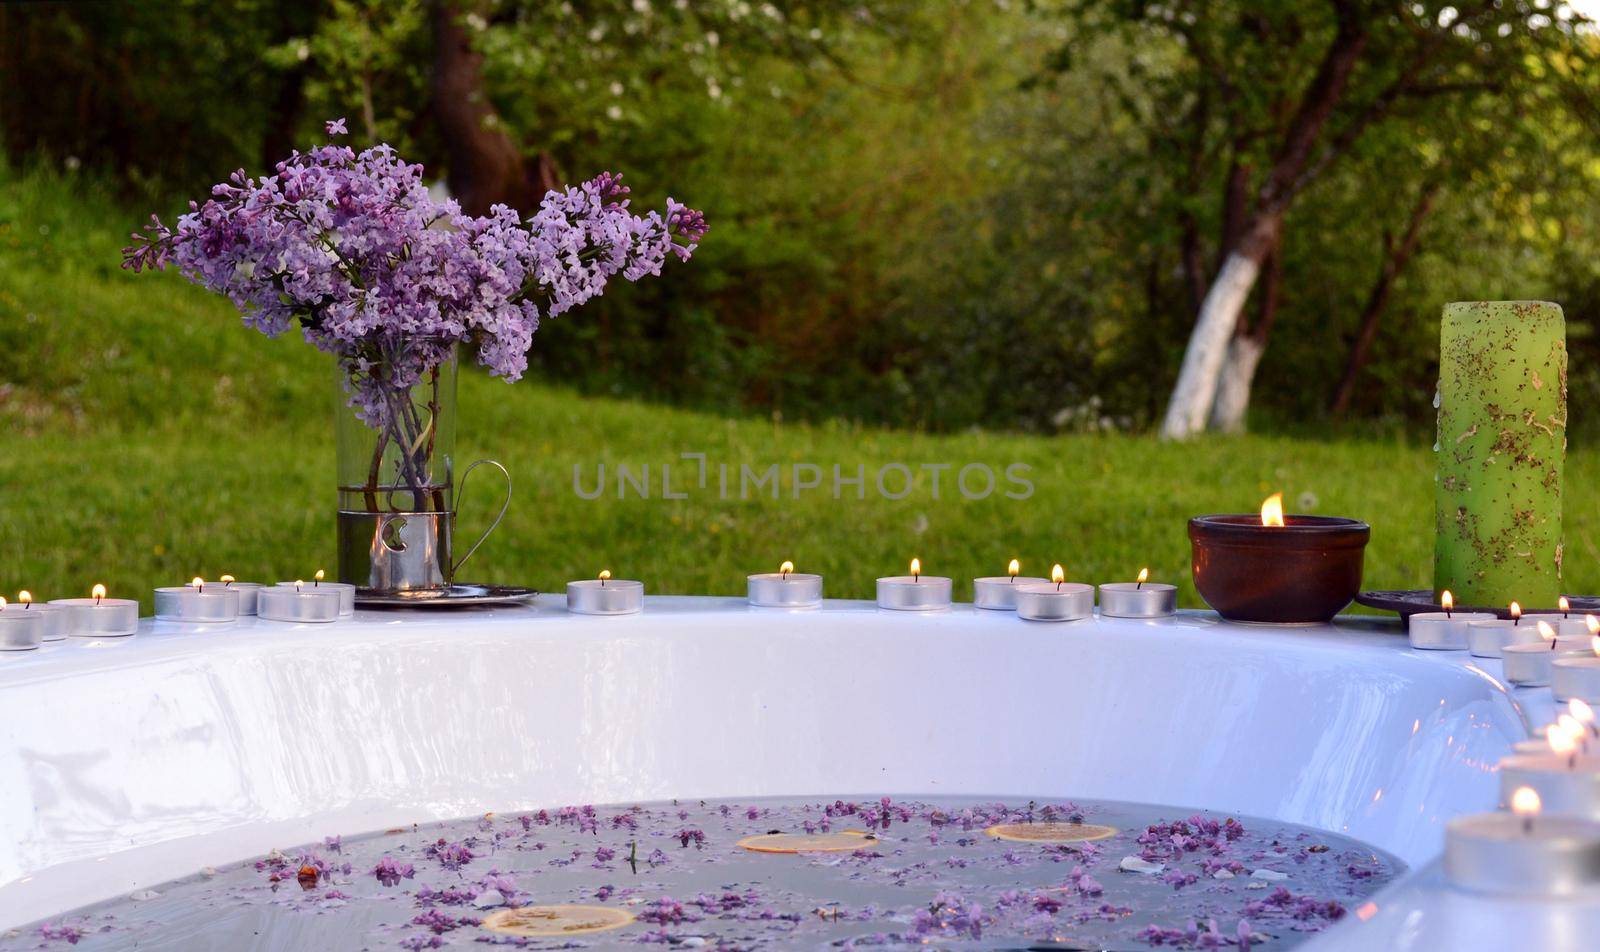 Abstract background with lilacs flowers and orange slices in a bathtub outdoor by hibrida13